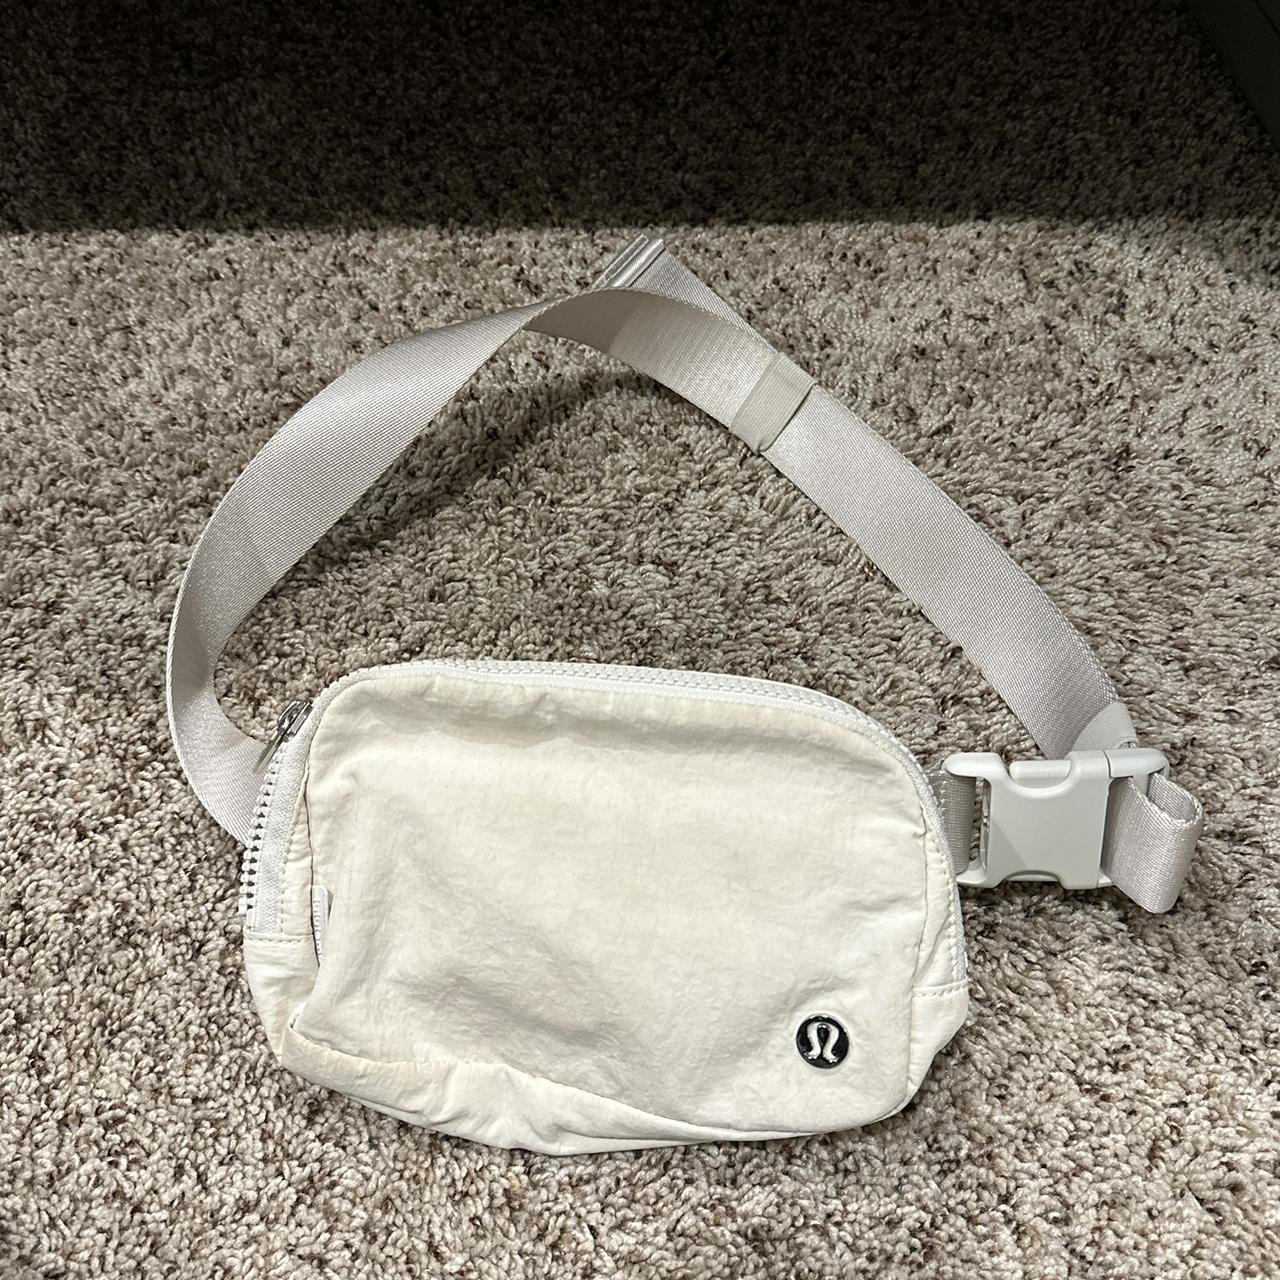 NWT Fila Fanny pack. Brand new, never worn or used. - Depop